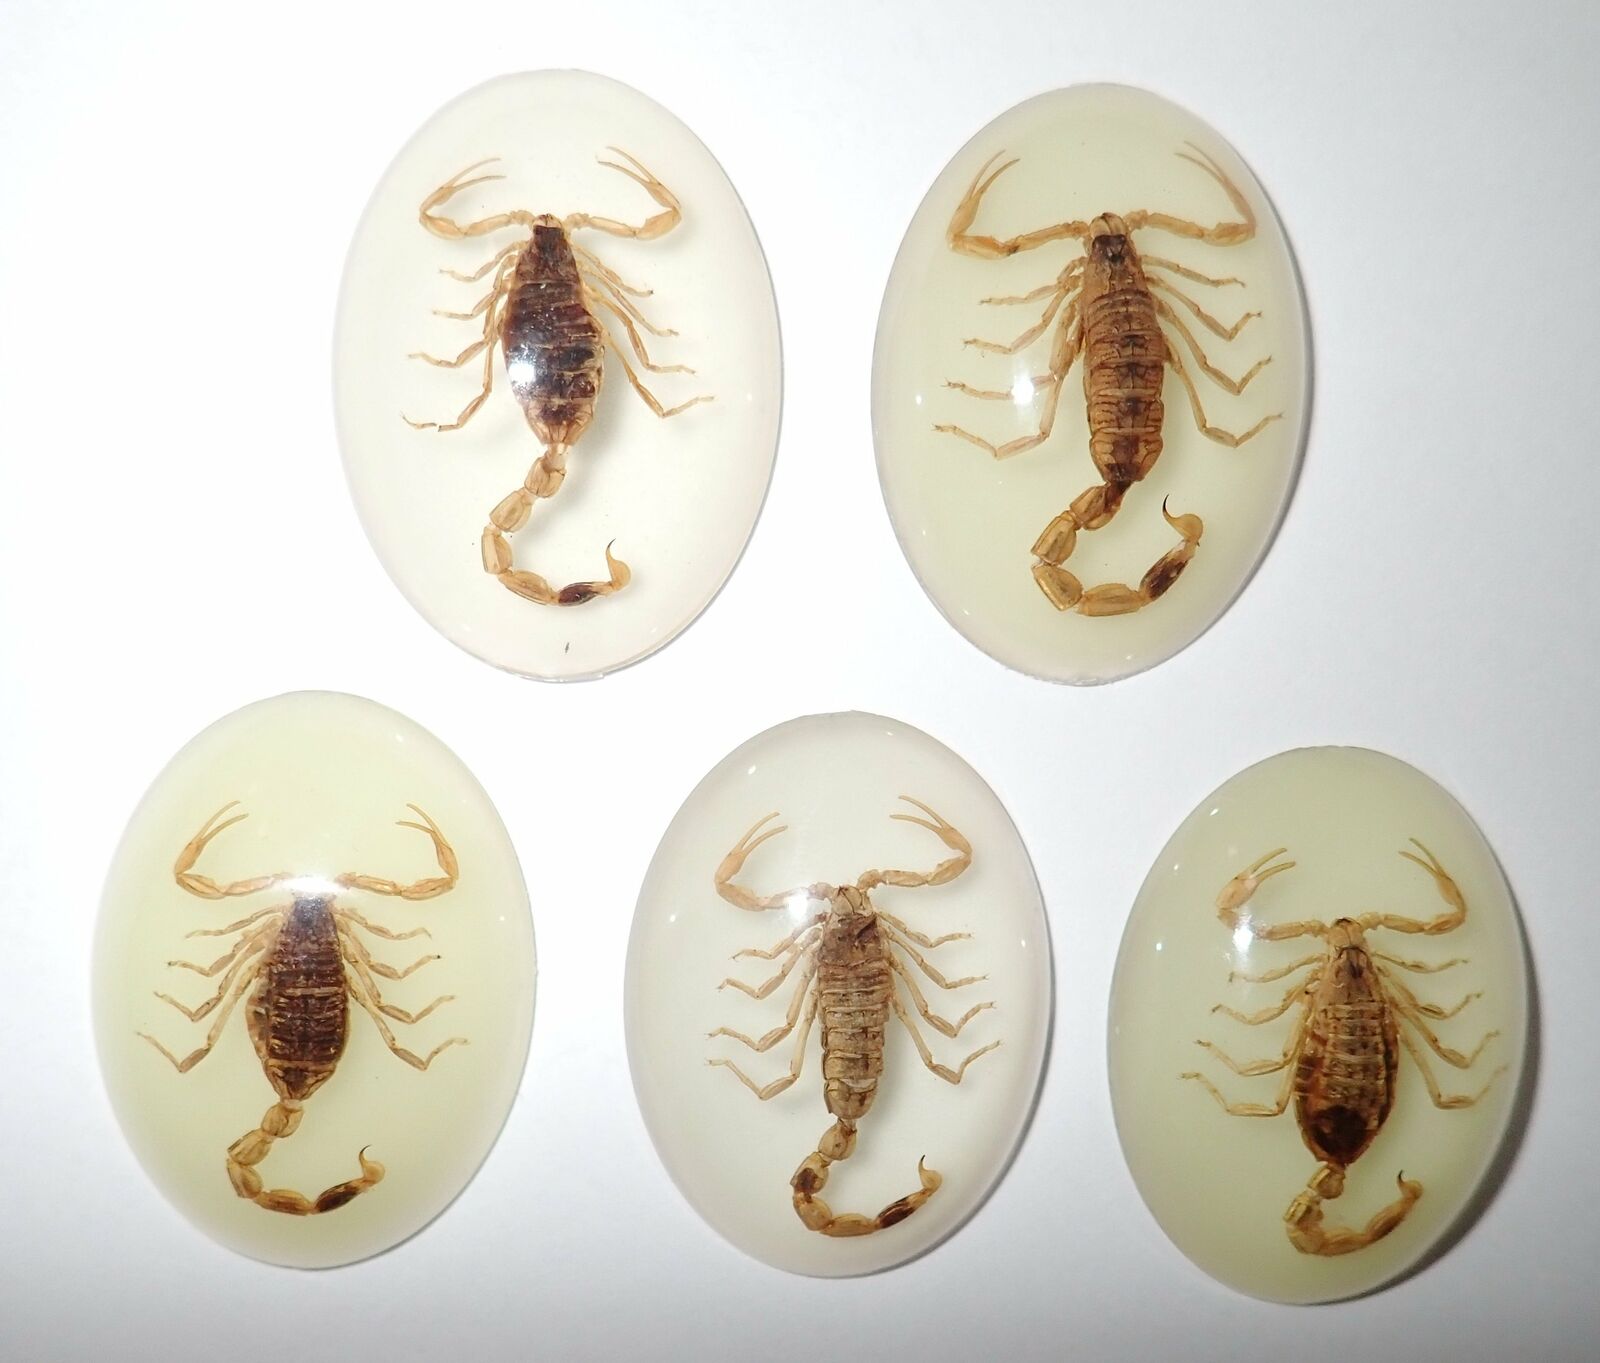 Insect Cabochon Golden Scorpion Specimen Oval 30x40 mm Glow 5 pieces Lot